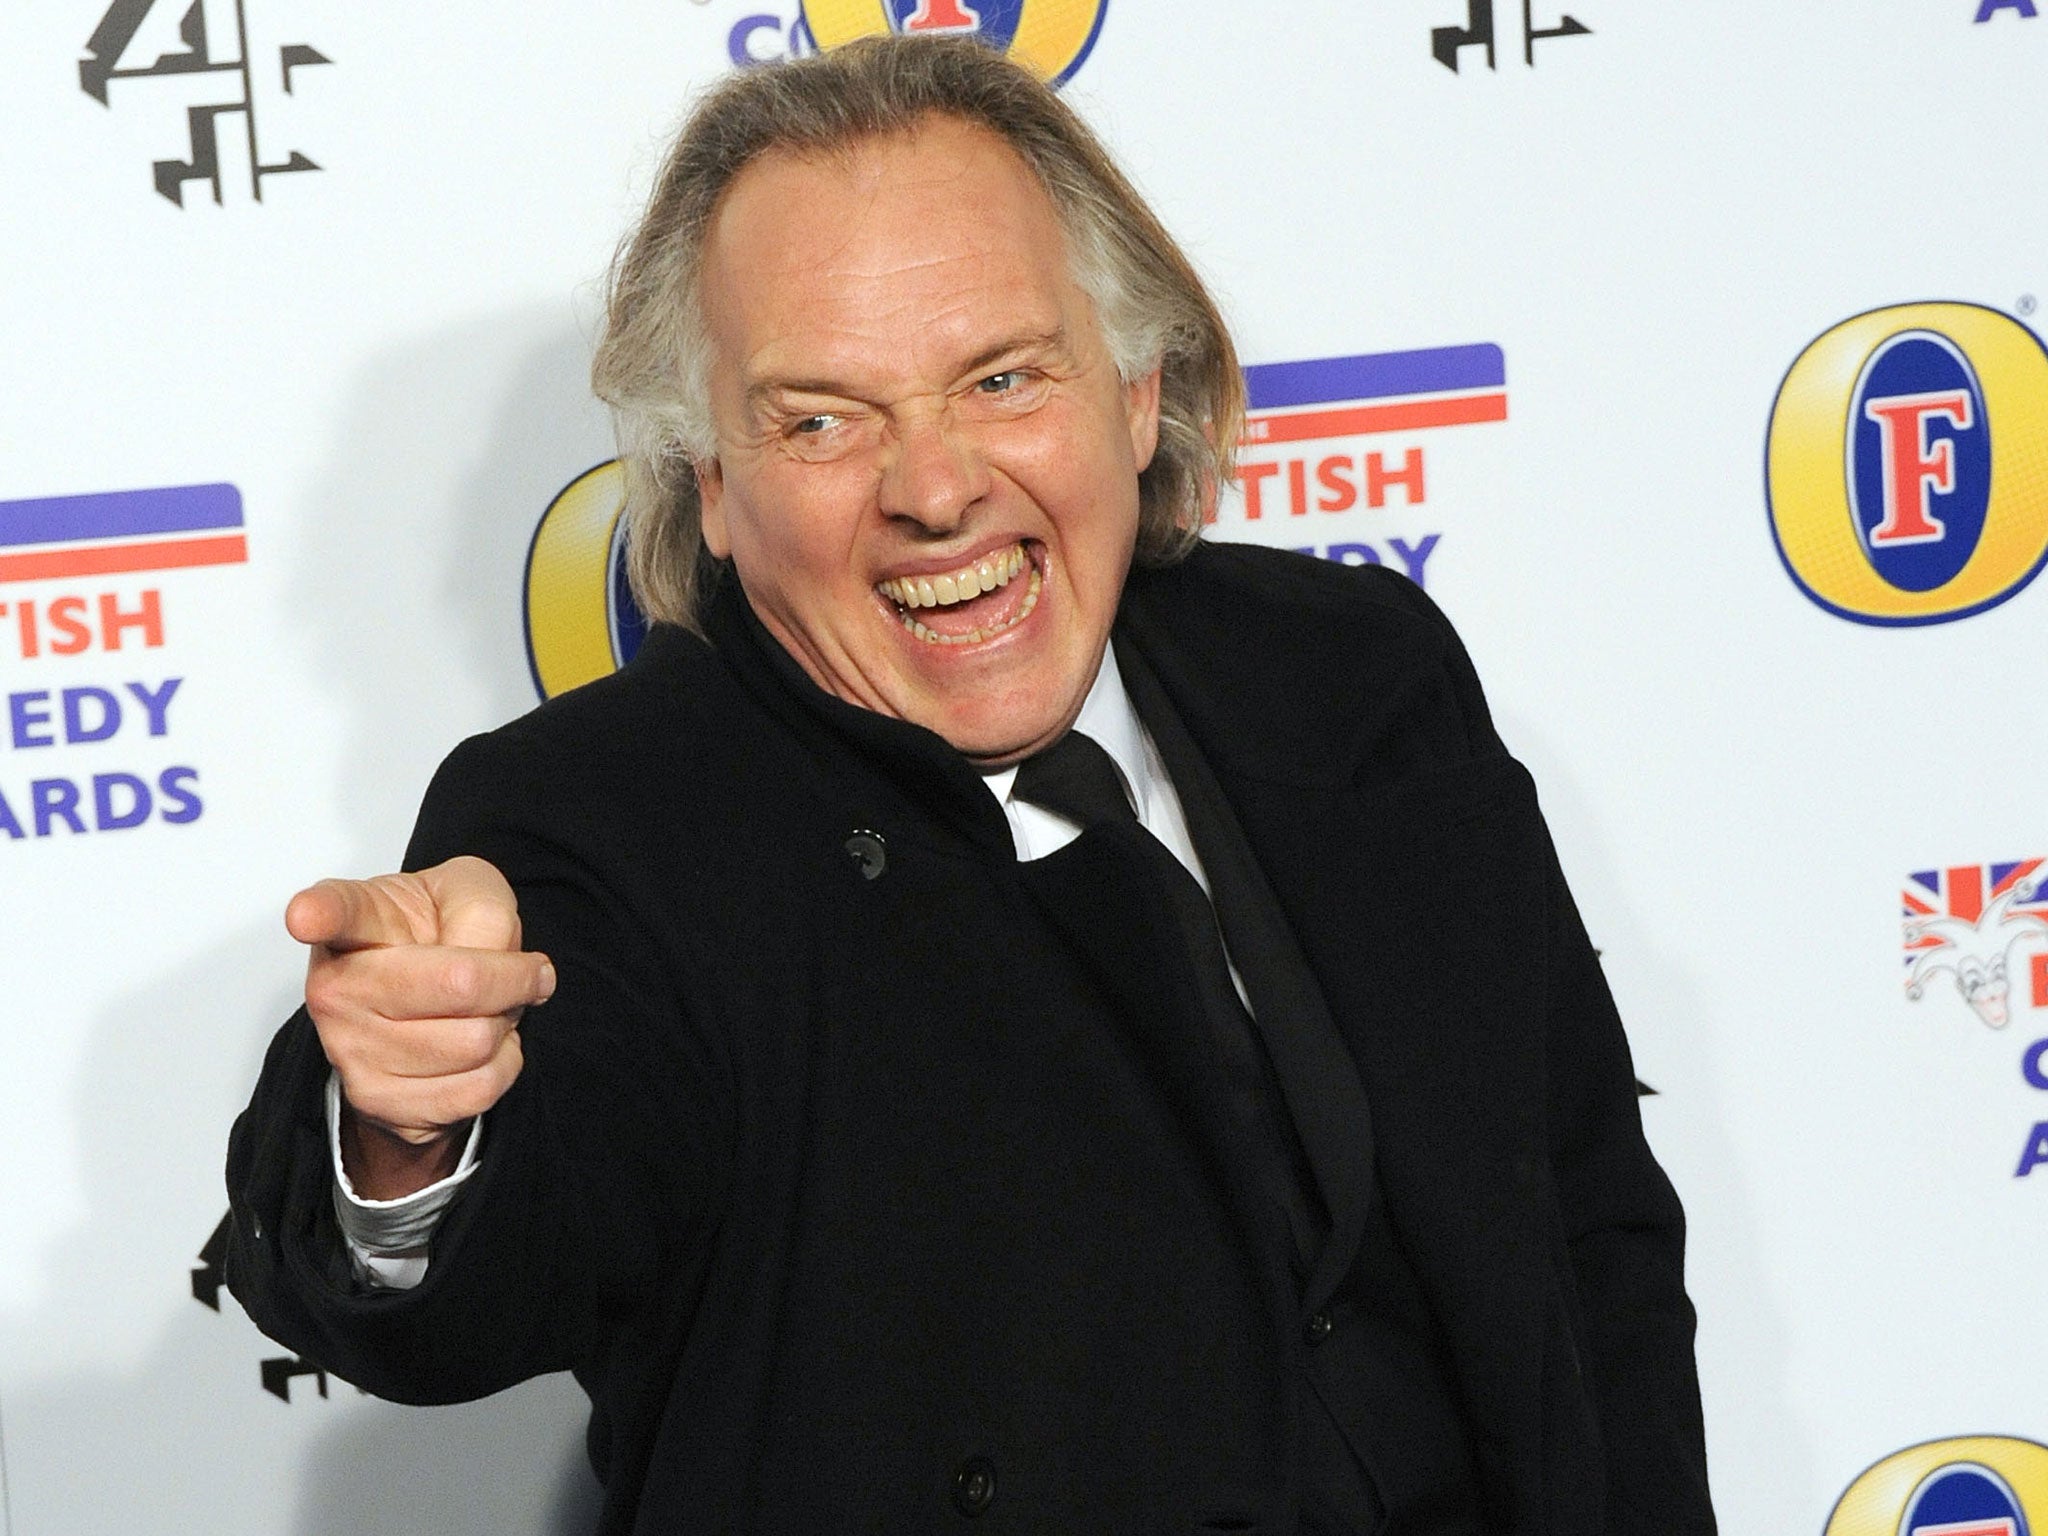 Rik Mayall’s final TV appearance will be broadcast next month when he appears in an episode of Crackanory, UKTV has confirmed.